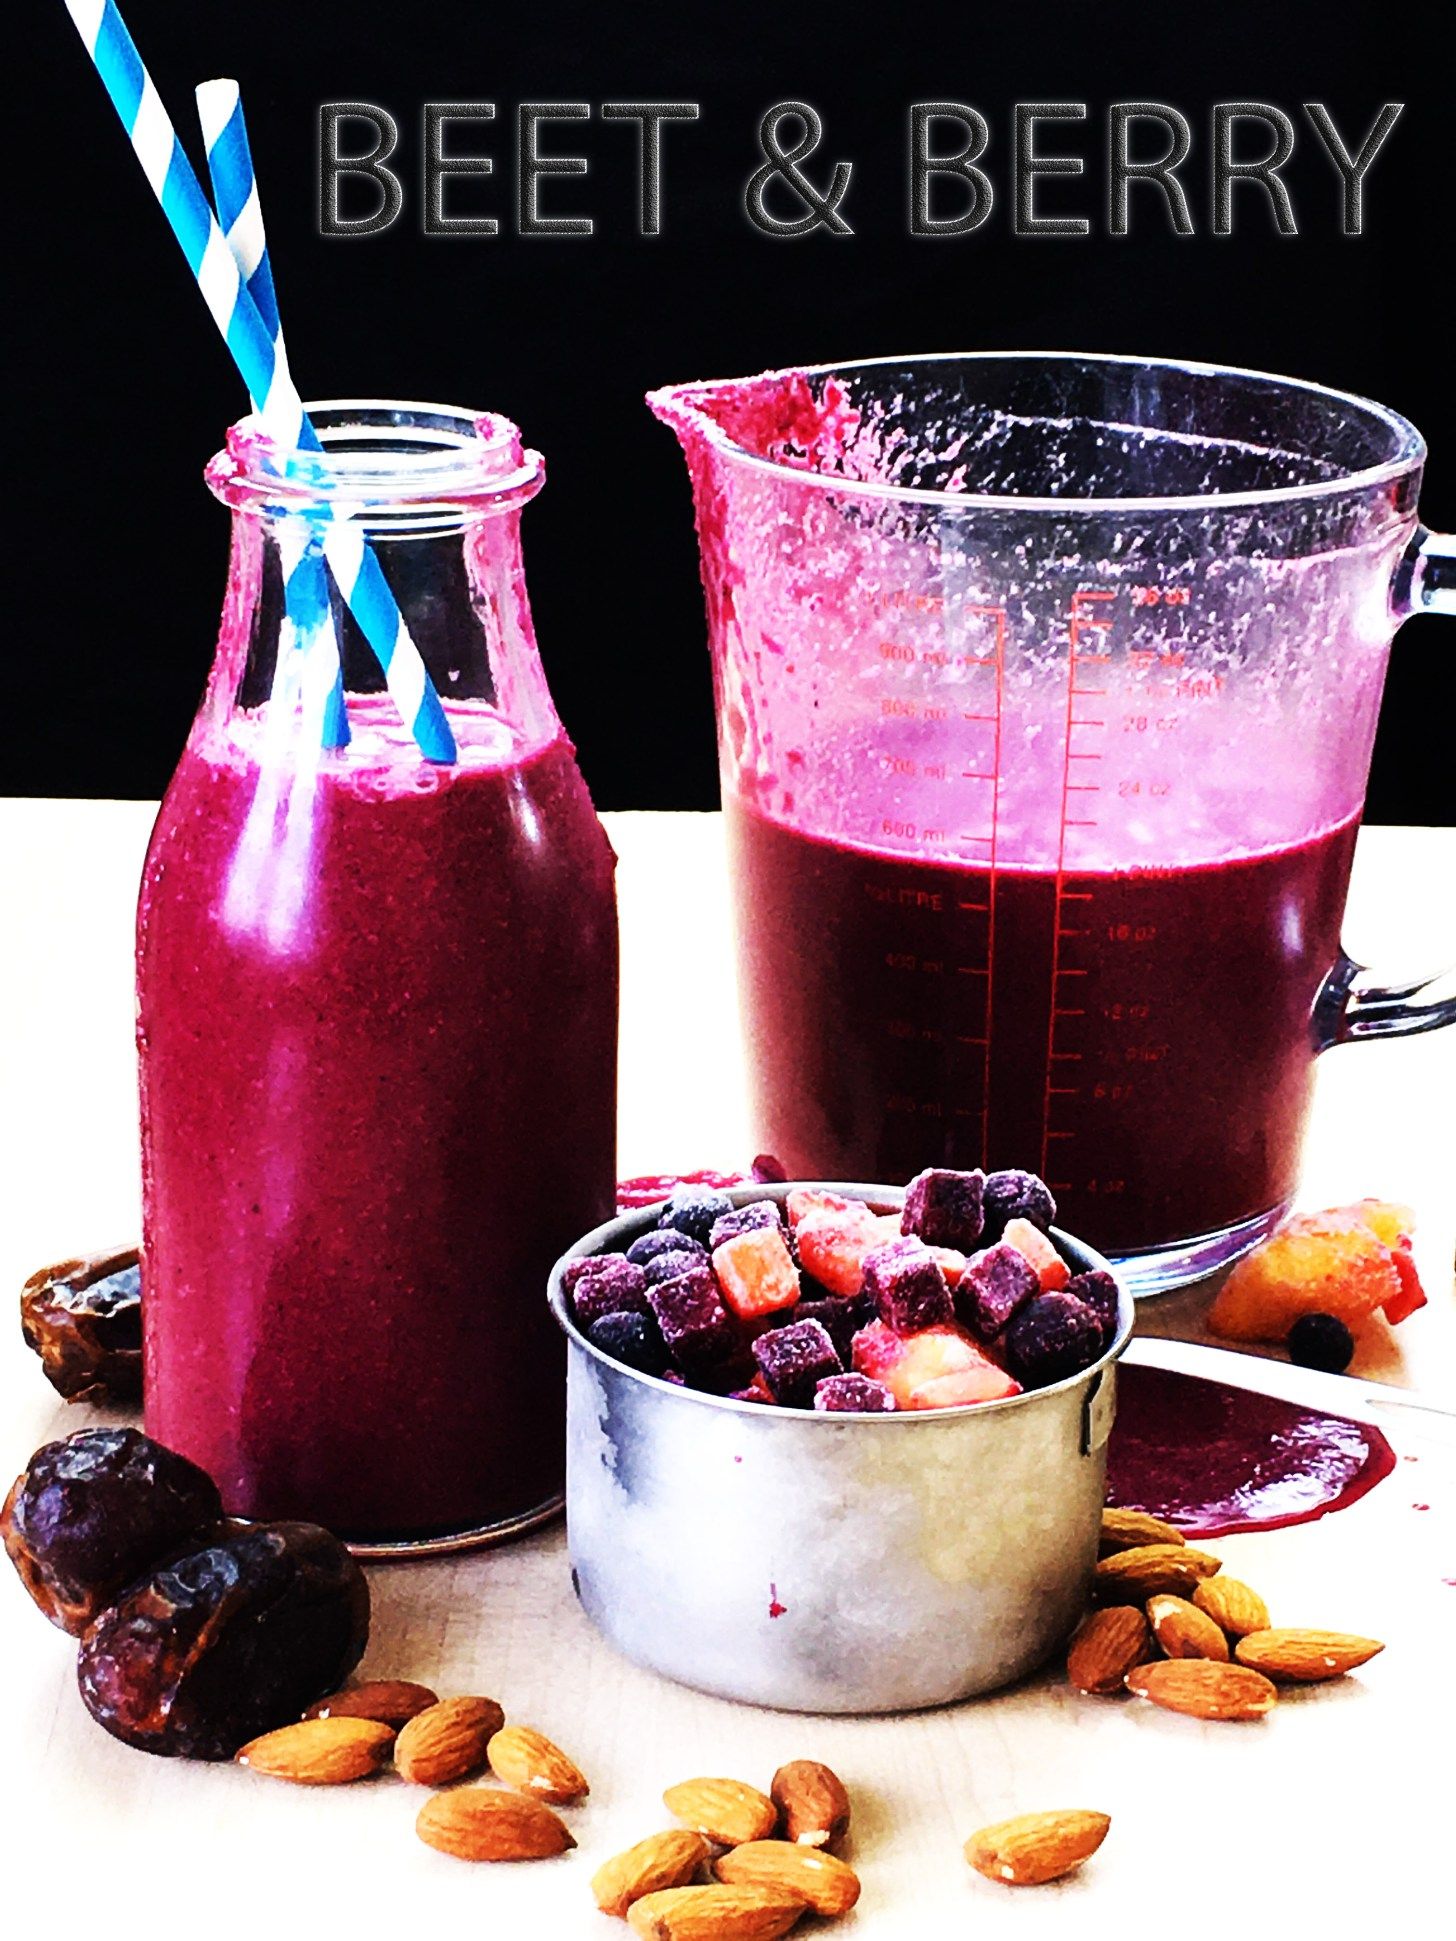 Beetroot and berry smoothie